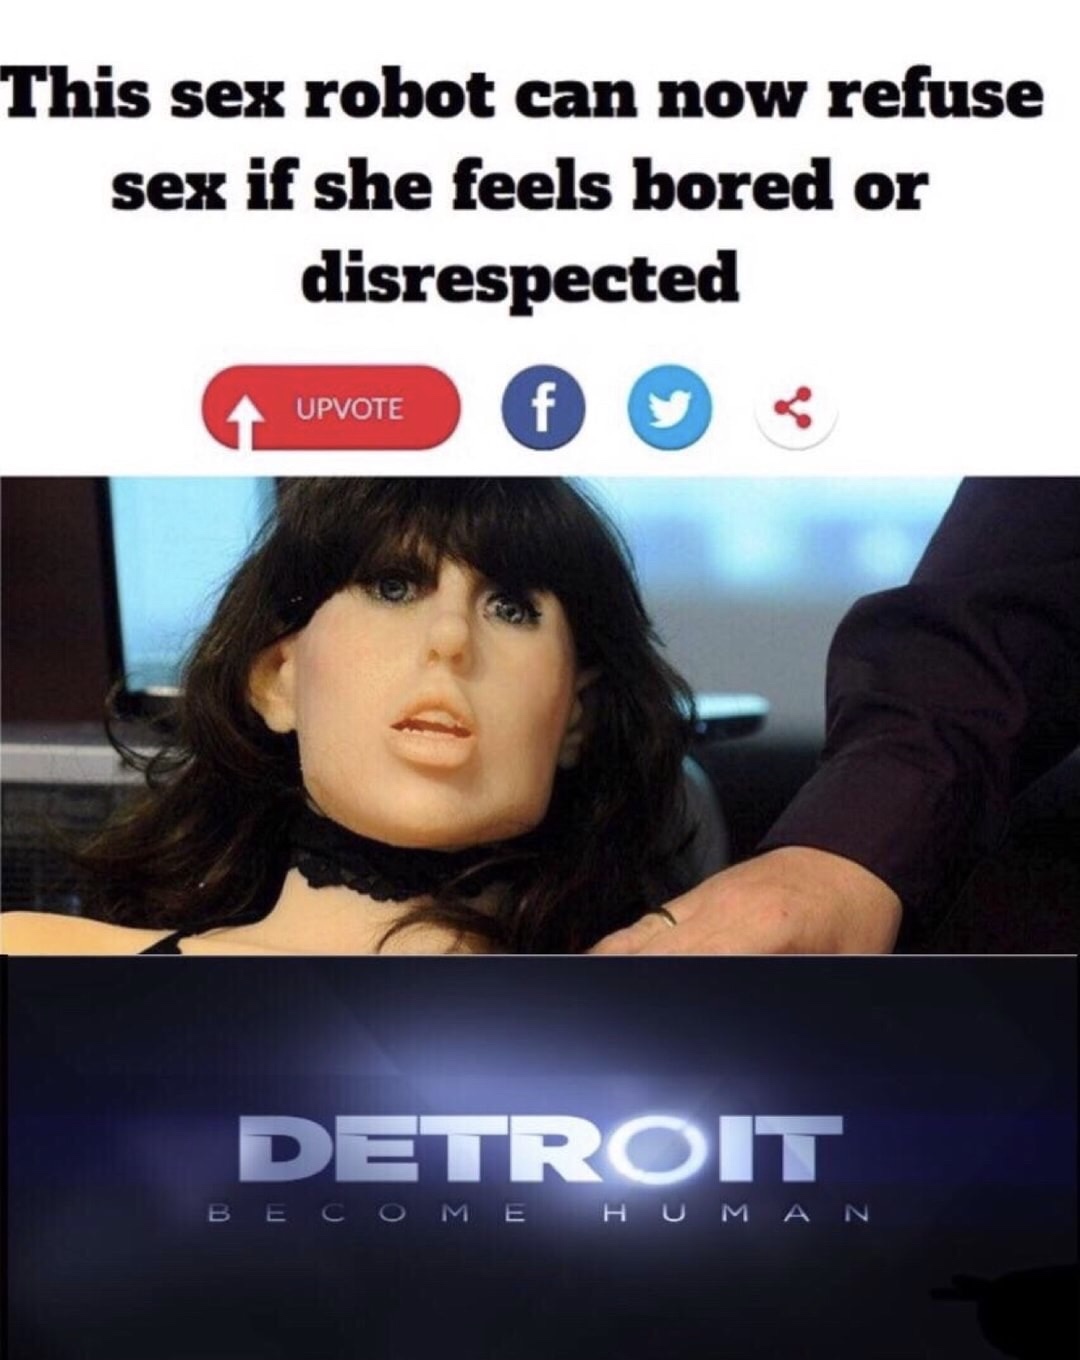 sex robot refuse meme - This sex robot can now refuse sex if she feels bored or disrespected Upvote 6 Upvote Detroit B E C O M E Human